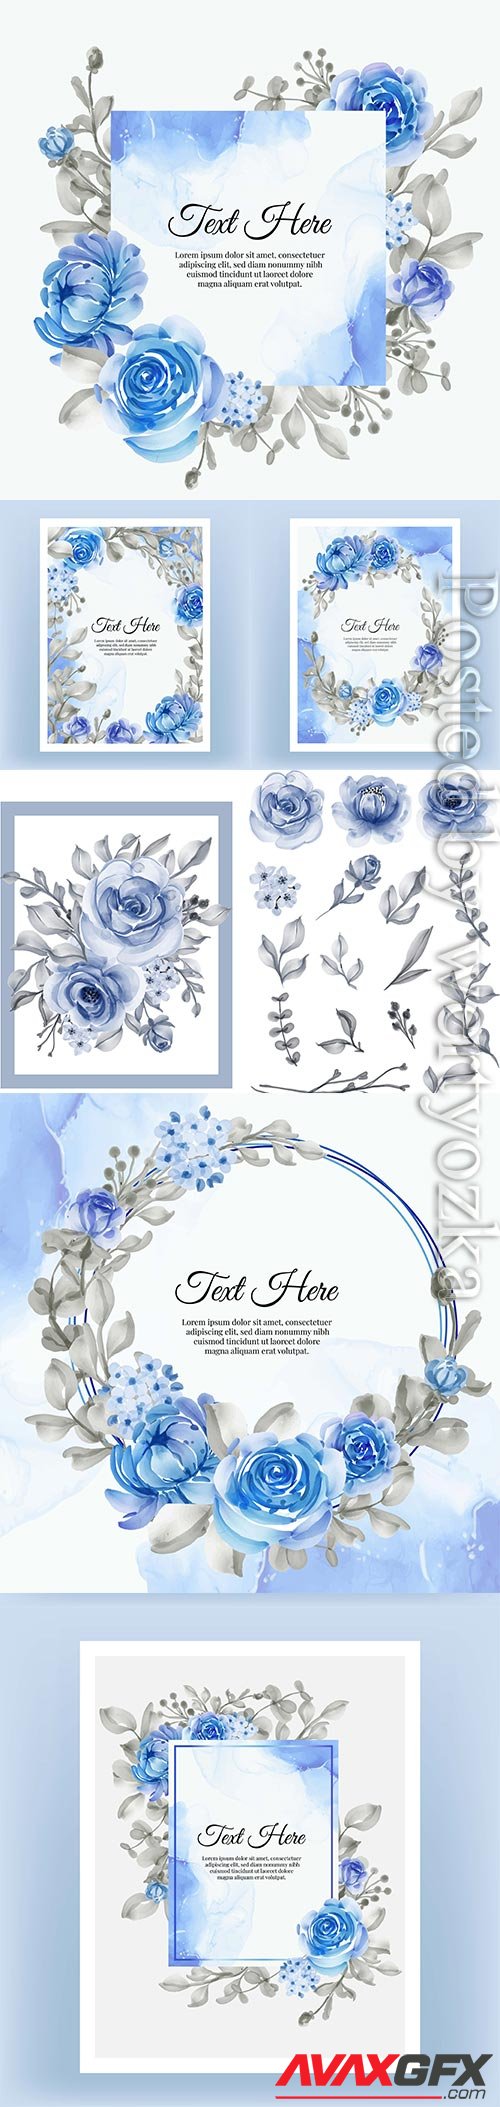 Watercolor illustration rose and leaf navy blue isolated clipart